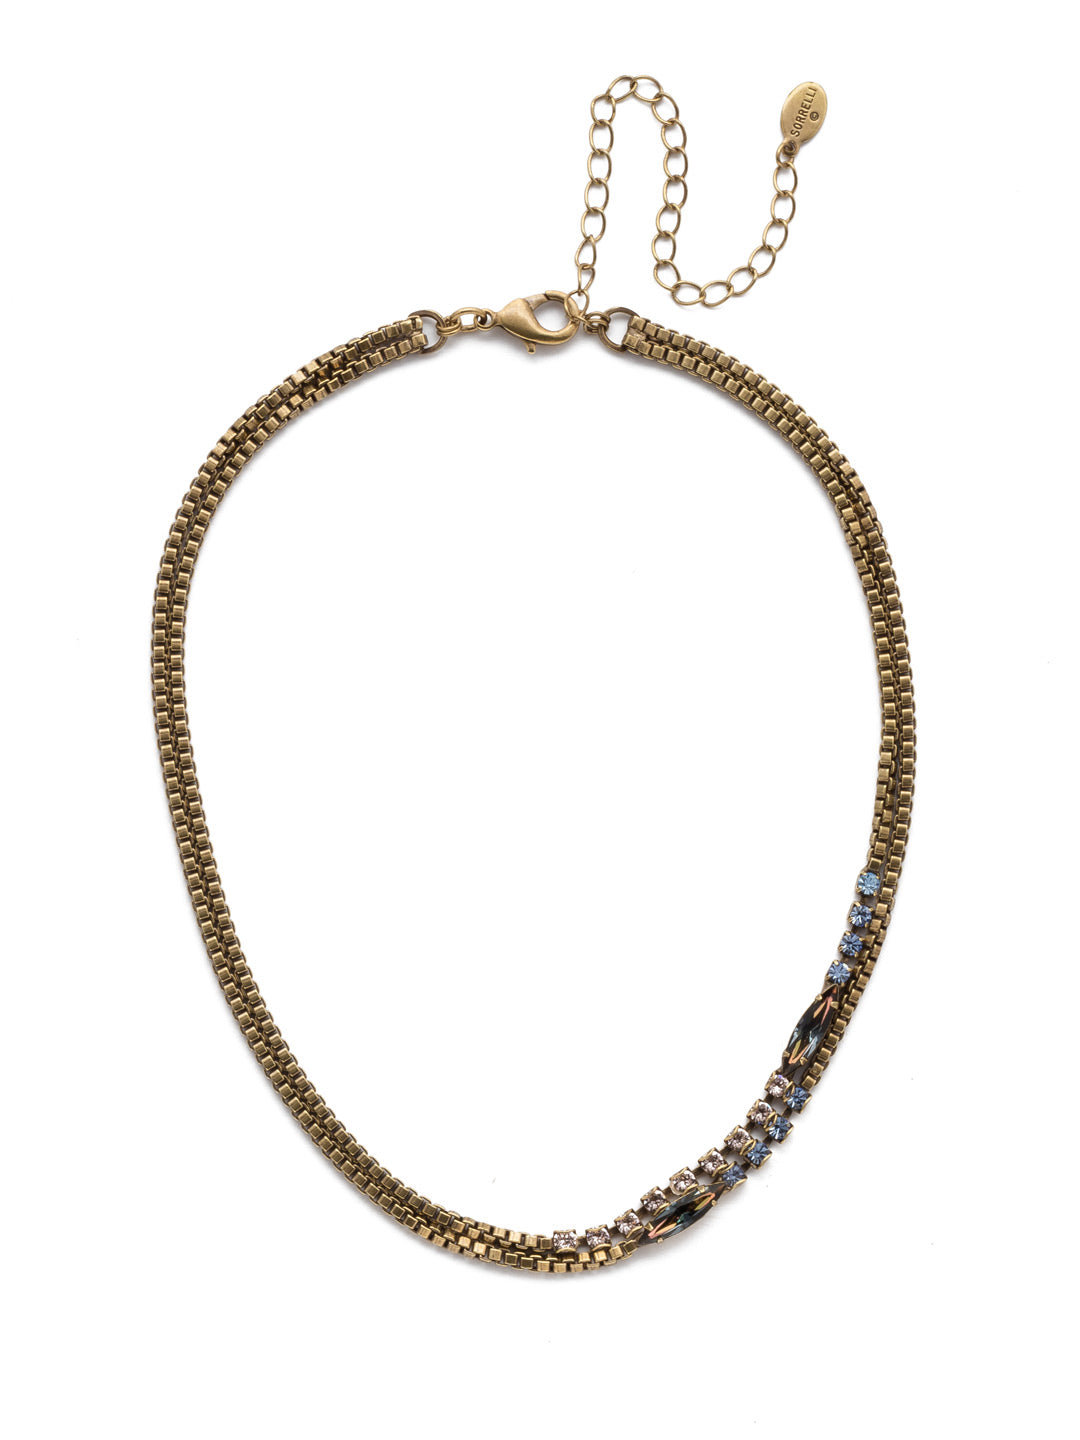 Banks Tennis Necklace - NEP11AGSDE - <p>Looking to layer on some edge? The Banks Tennis Necklace is a great place to start. A double-loop of chain metal is partially-encrusted in both round and navette sparkling crystals. From Sorrelli's Selvedge Denim collection in our Antique Gold-tone finish.</p>